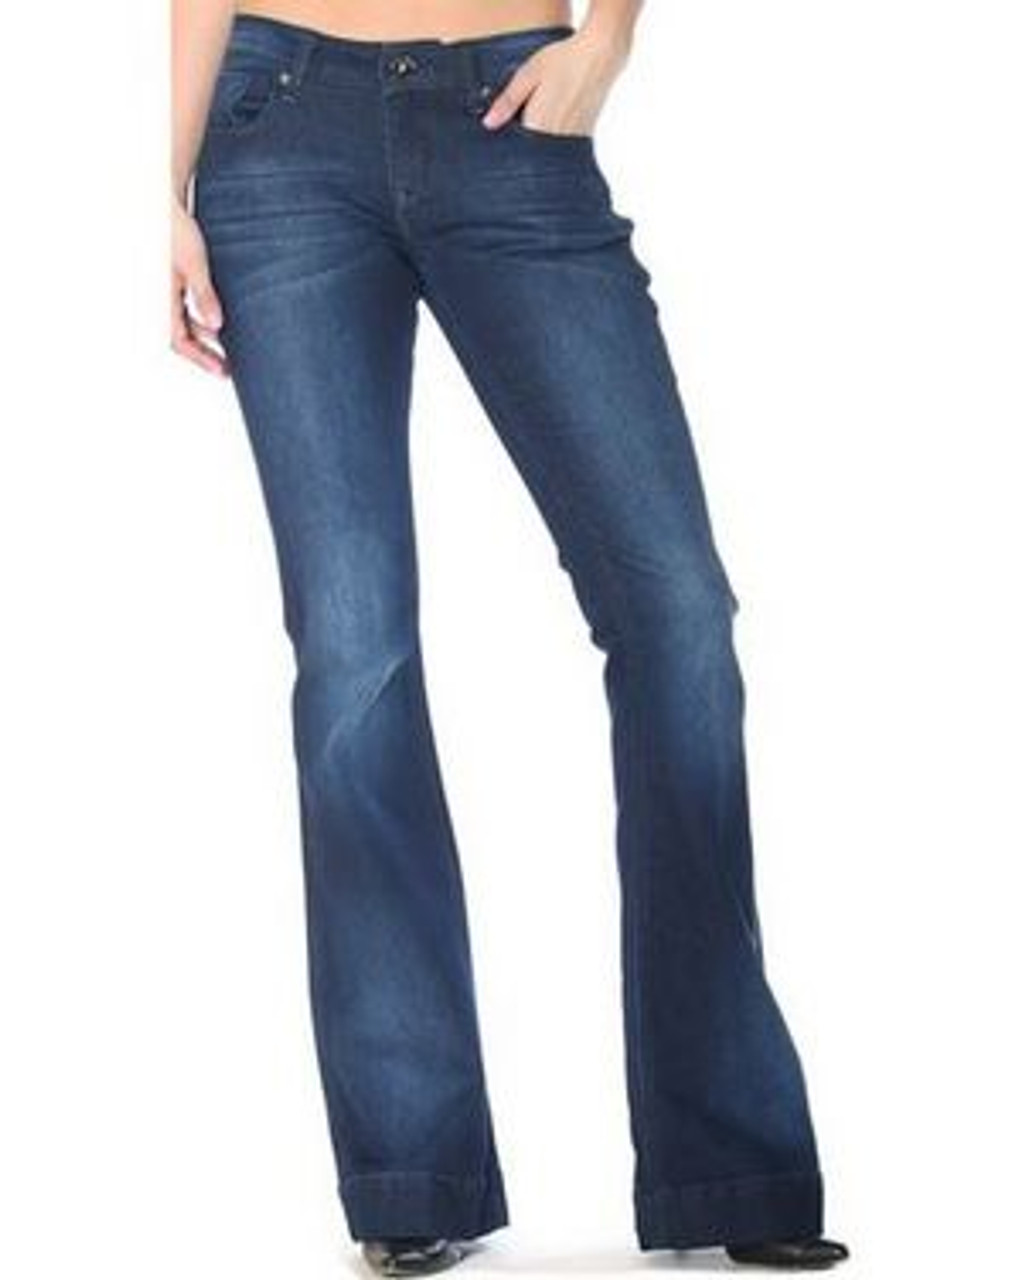 double stitched true religion jeans